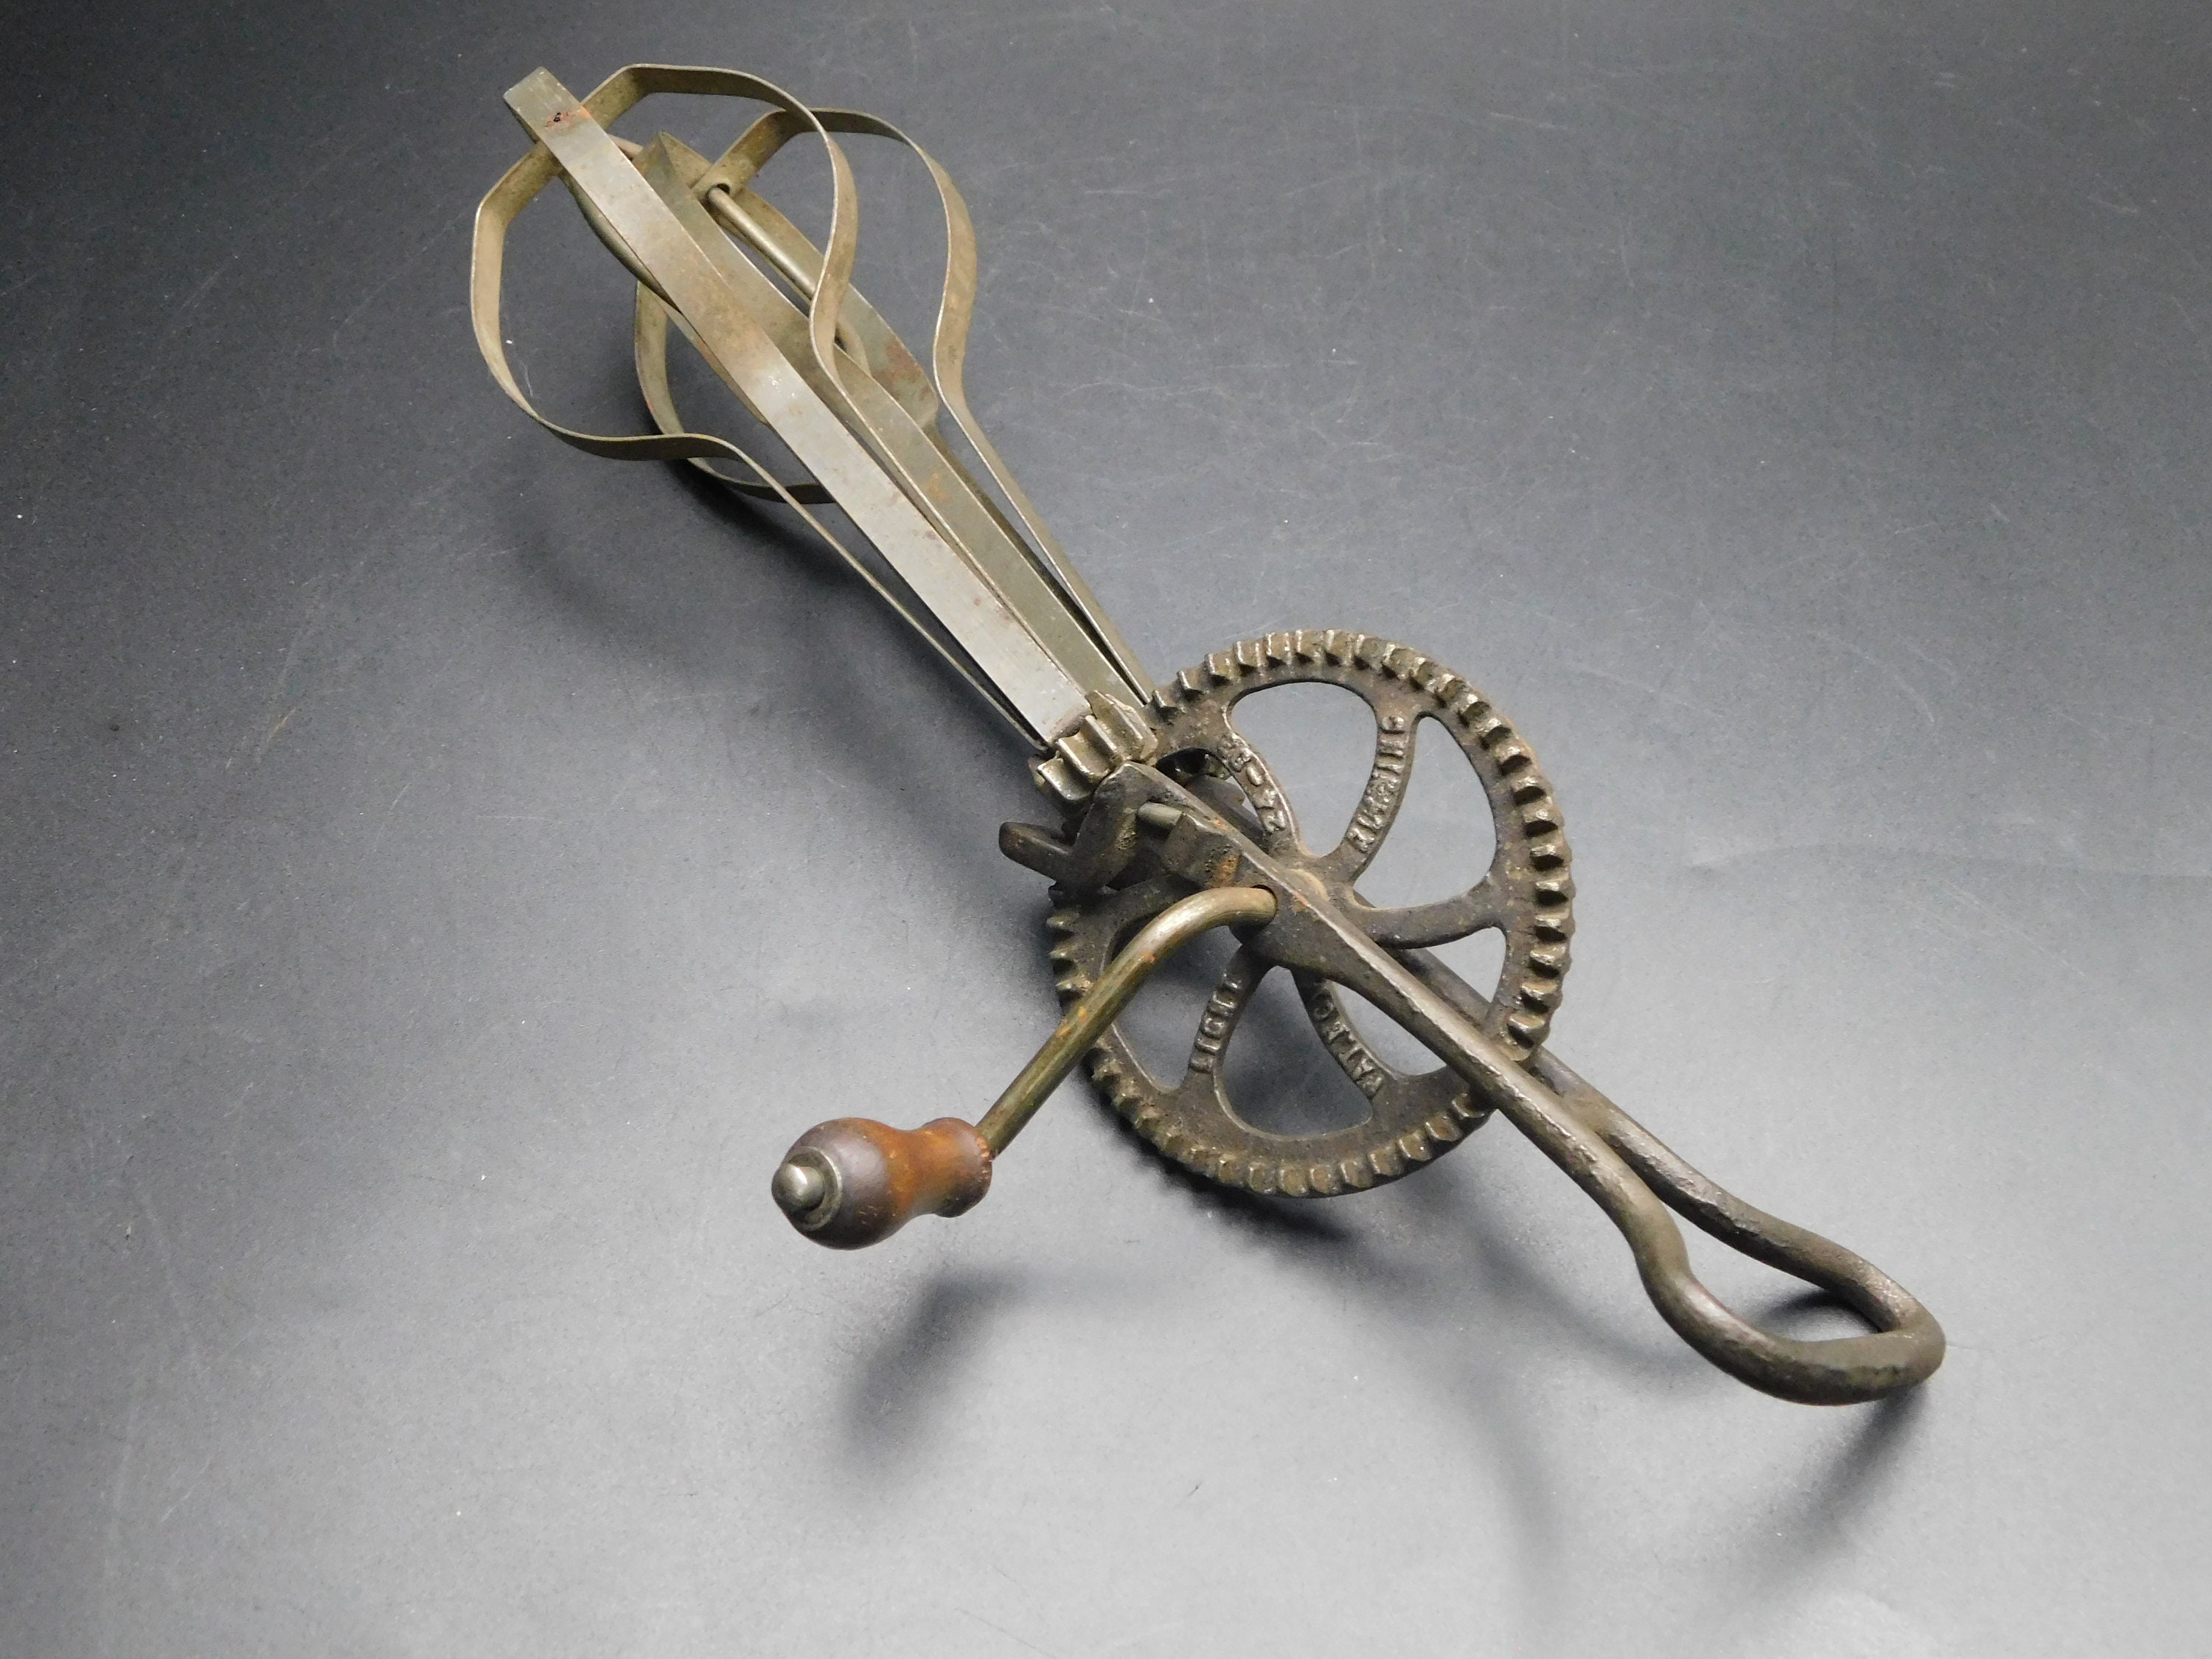  Old Fashioned Amish Crafted Manual Hand Beater - Vintage Style!  Proudly Made in The USA!: Home & Kitchen